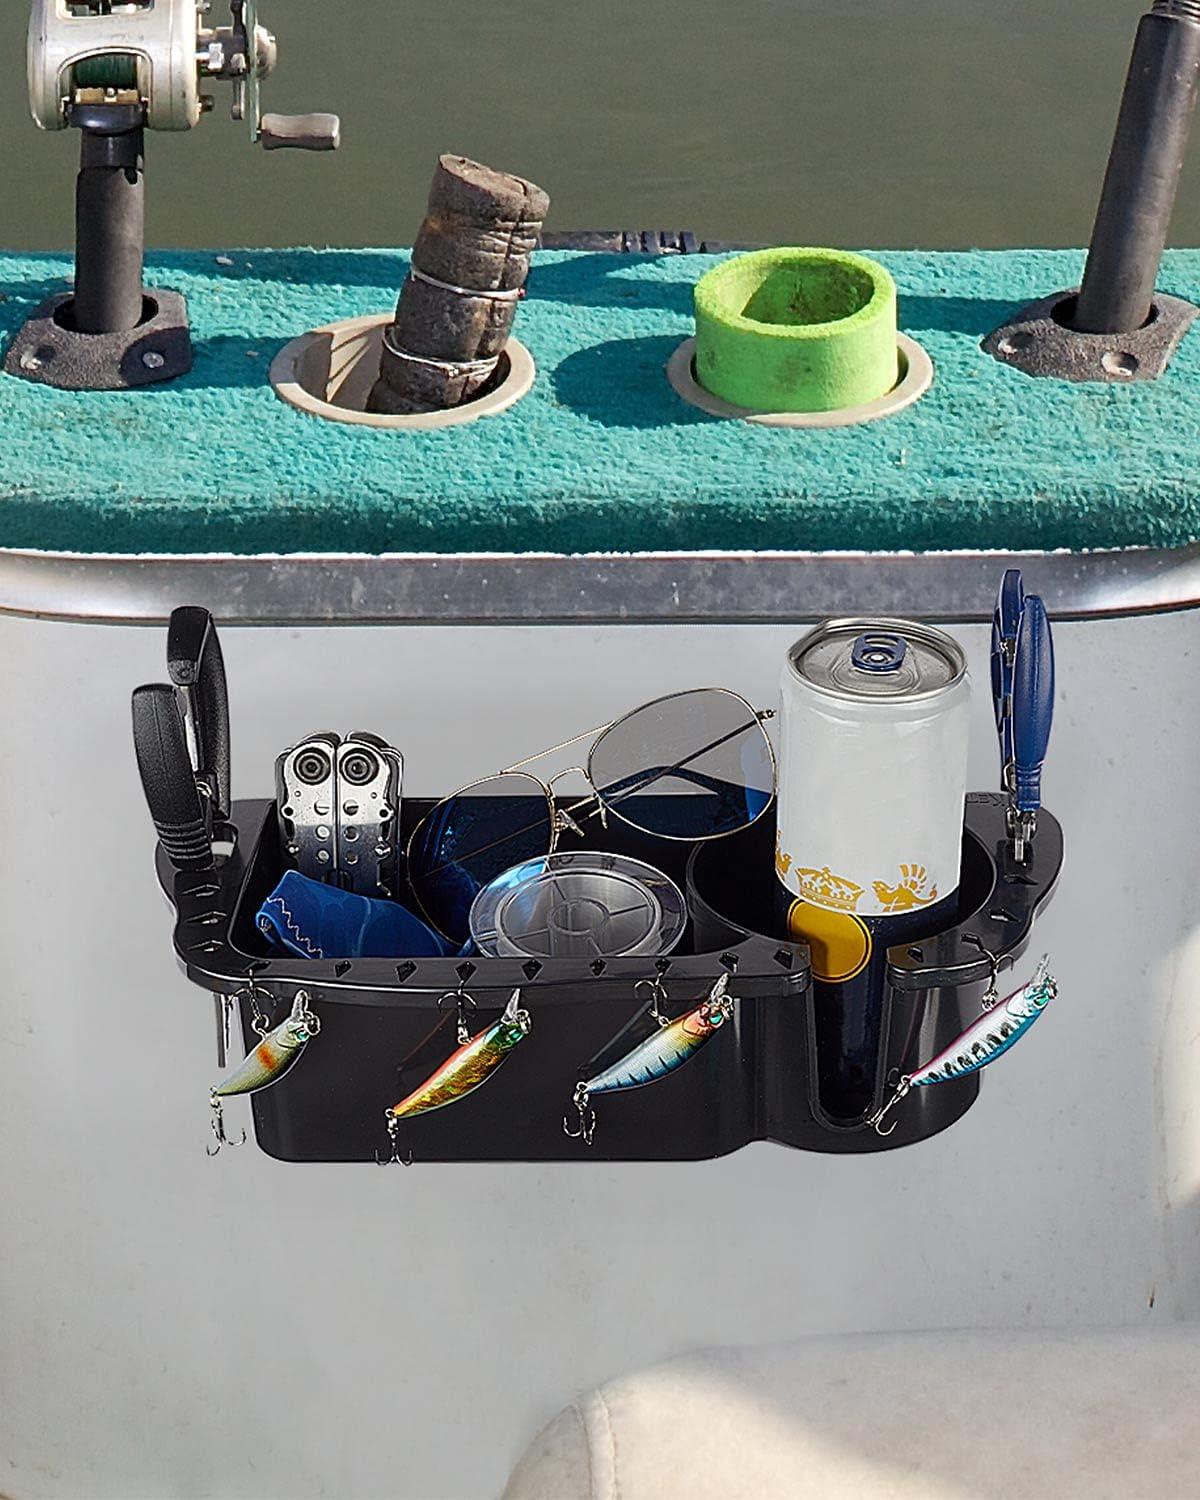 kemimoto Boat Caddy Organizer, Marine Cup Holder Universal Fit for